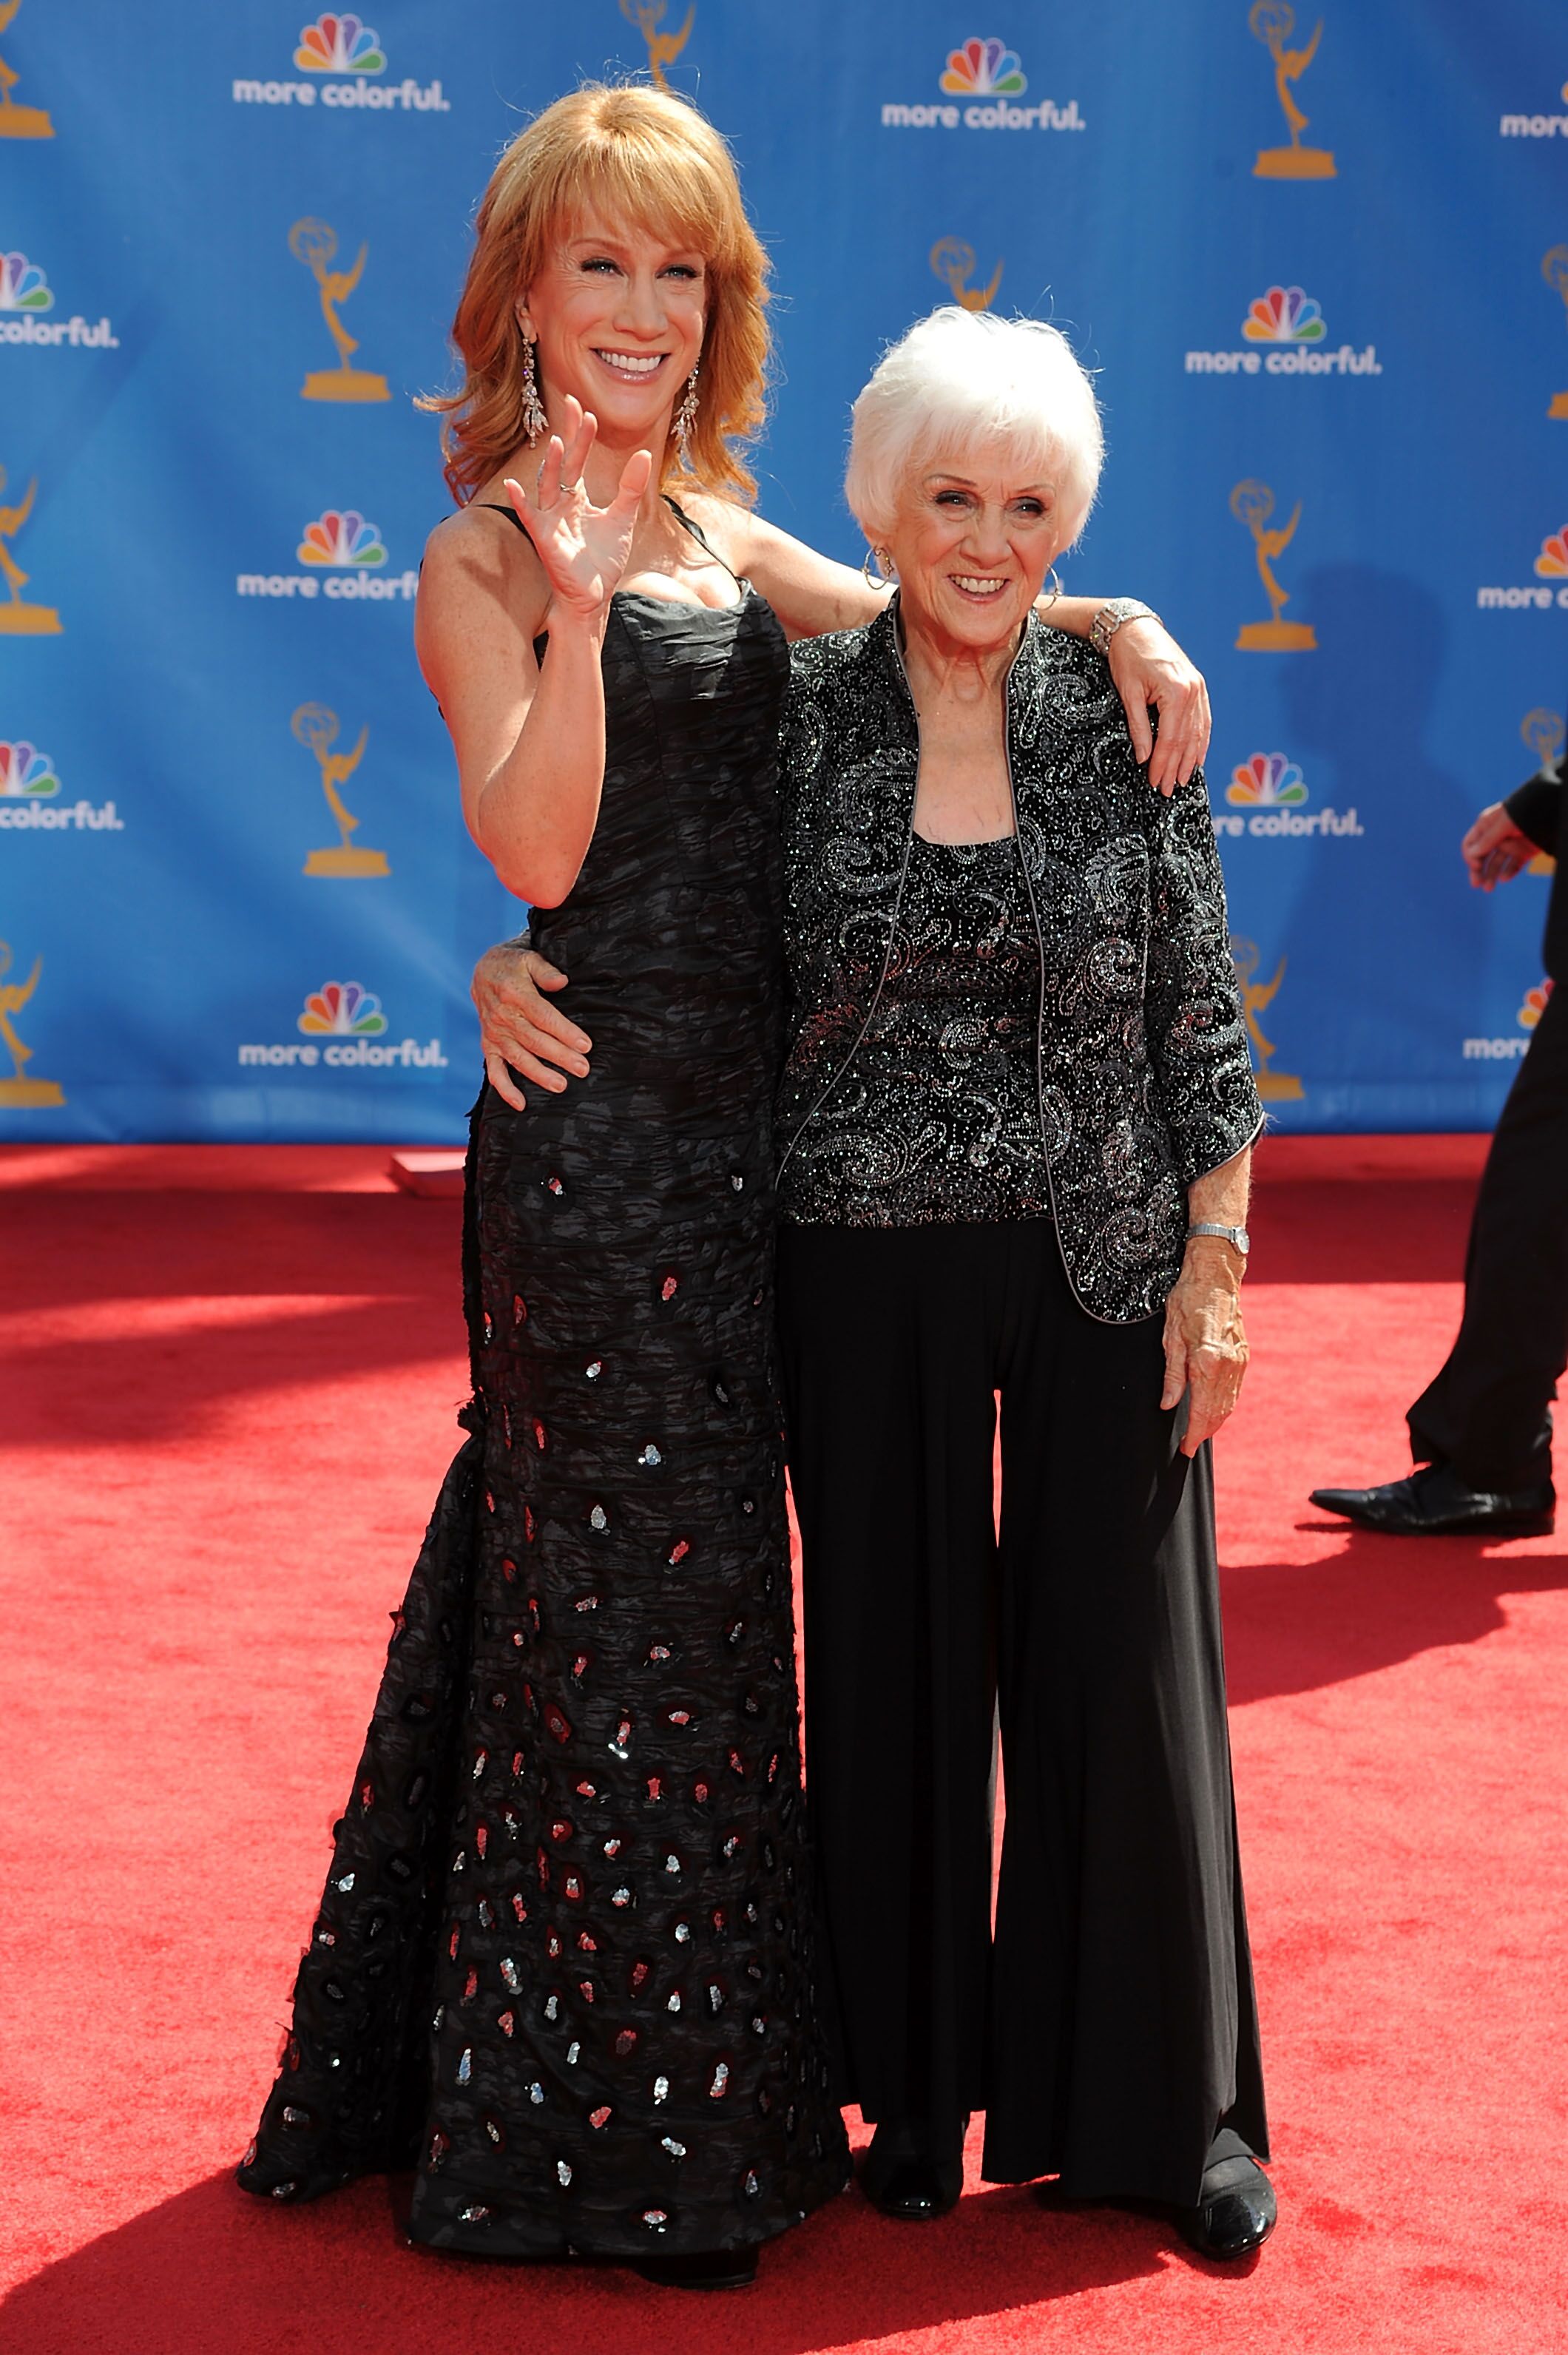 Kathy and Maggie Griffin at the 62nd Annual Primetime Emmy Awards on August 29, 2010, in Los Angeles, California | Photo: Frazer Harrison/Getty Images